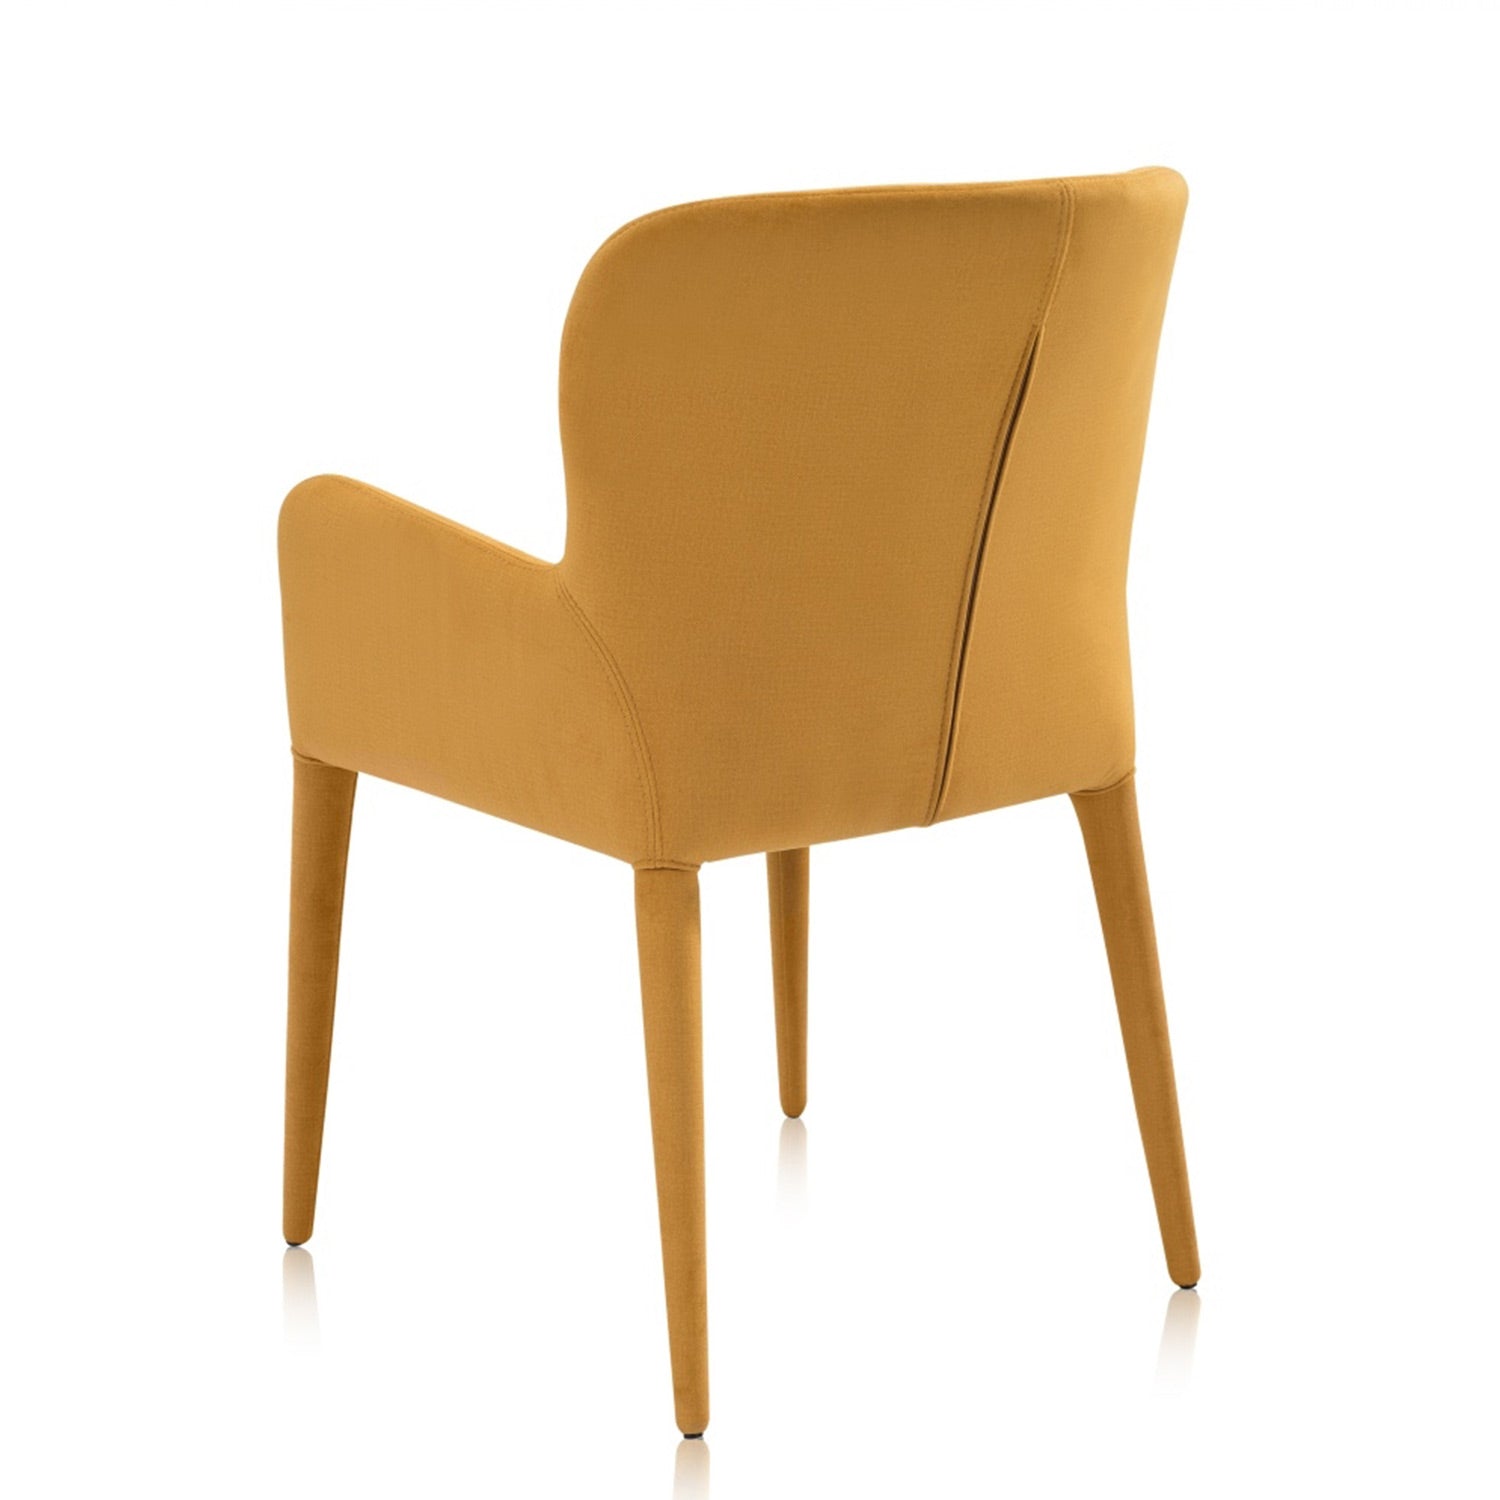 Aviano dining chair